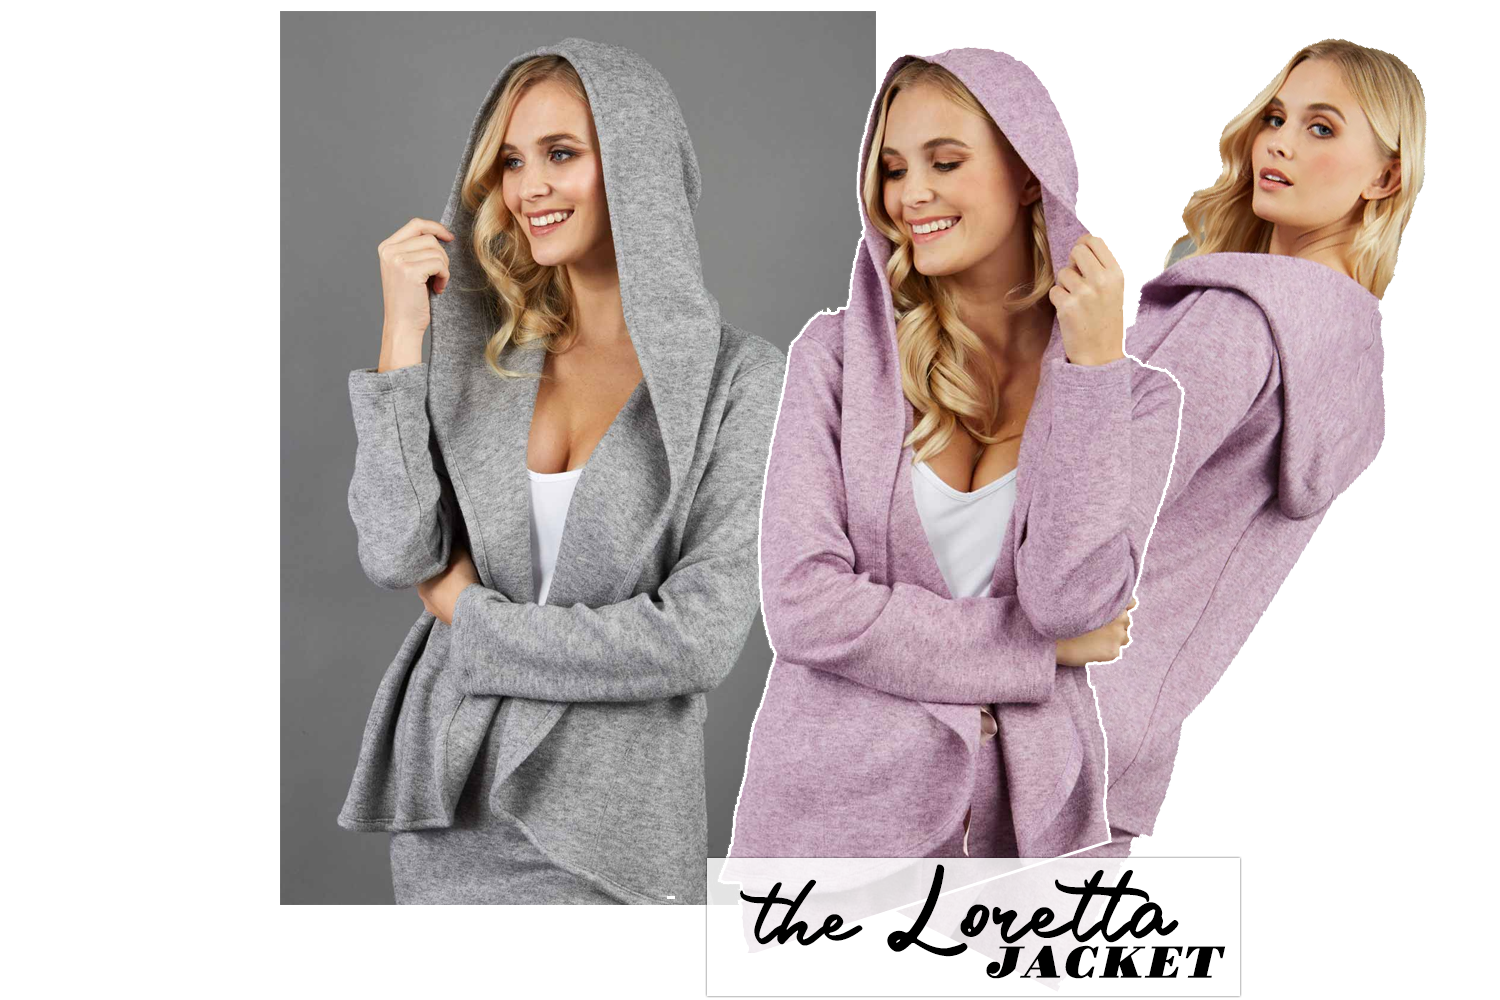 three images combined into one edit, of a model wearing the Loretta jacket in grey and lavender.